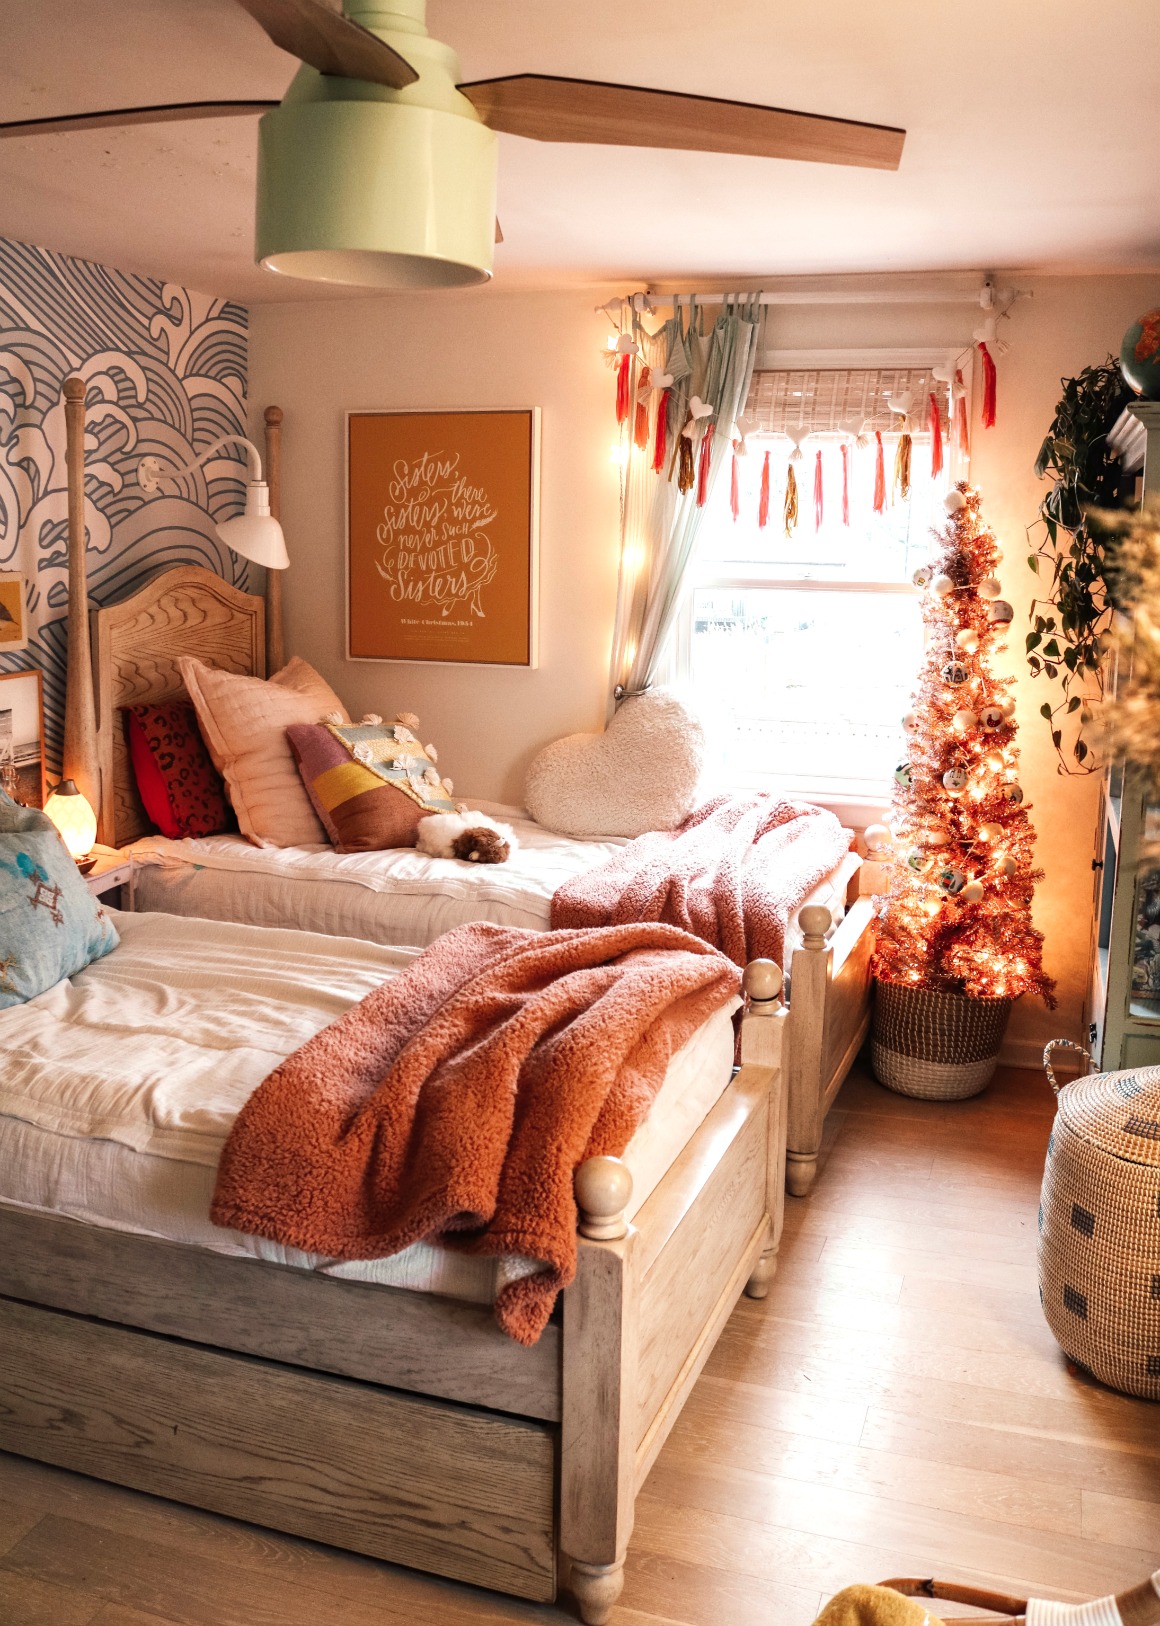 Christmas Home Decor in a Small Space